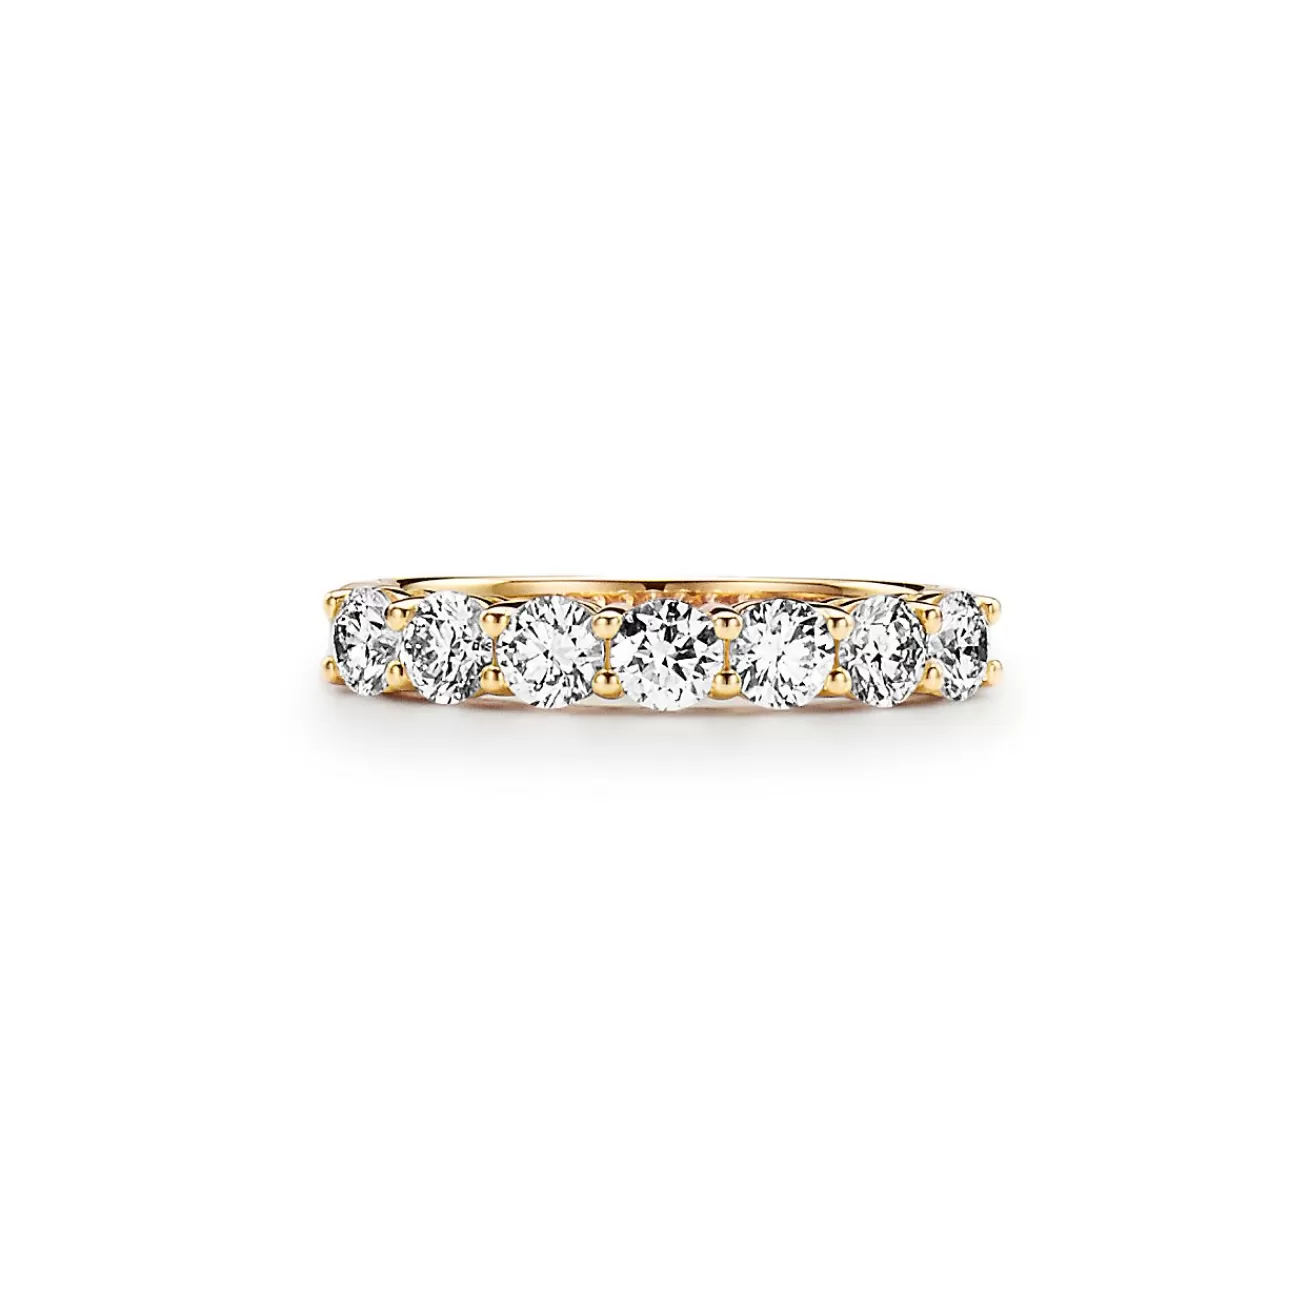 Tiffany & Co. Tiffany Forever Band Ring in Yellow Gold with a Half-circle of Diamonds, 3.5 mm | ^Women Rings | Stacking Rings